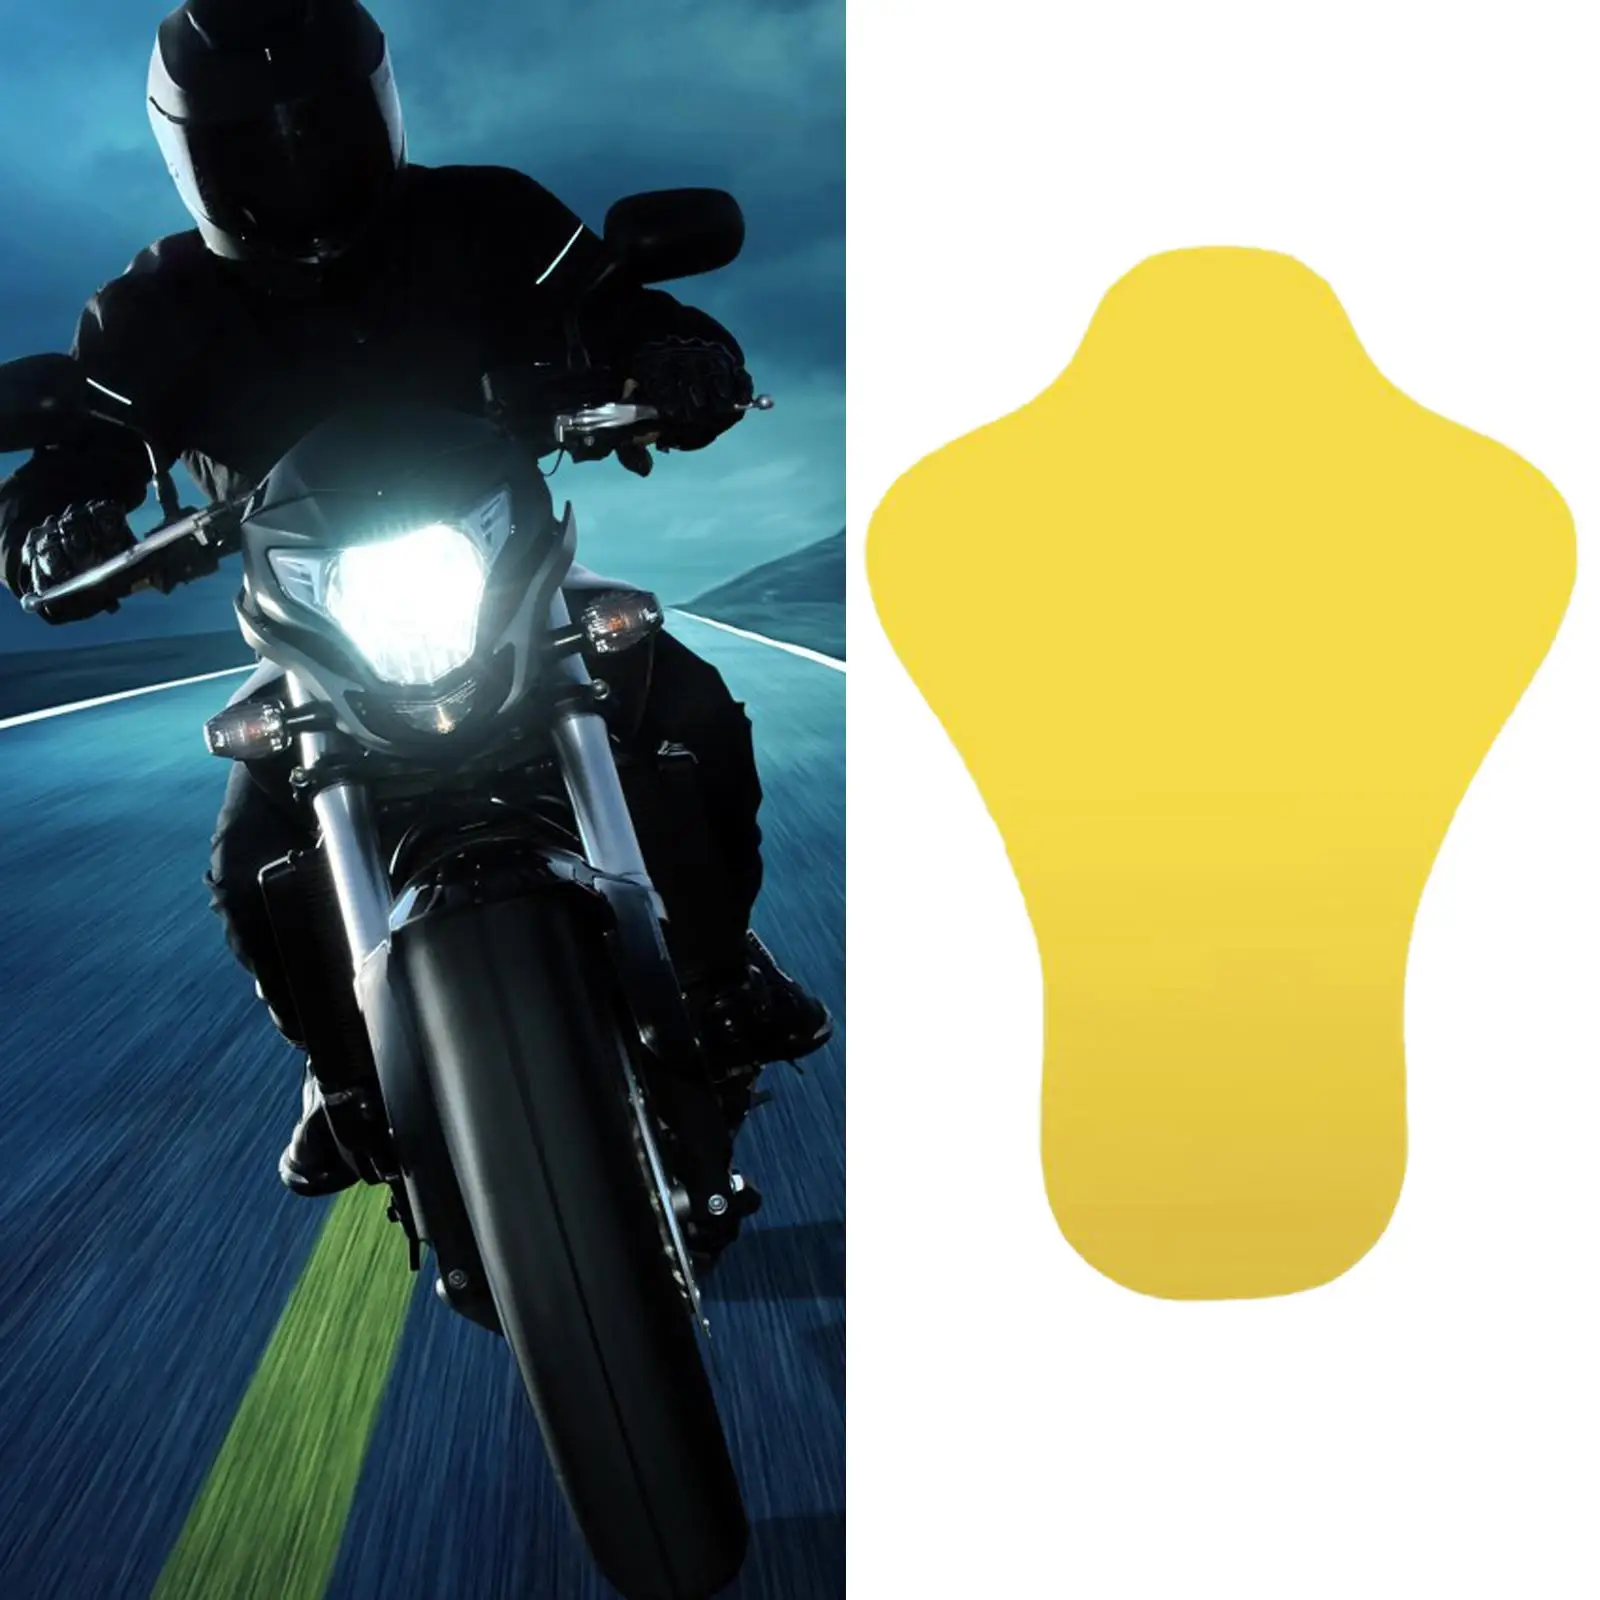   Motorcycle Armor Motorcycle Protective Removable Knee Pad Riding